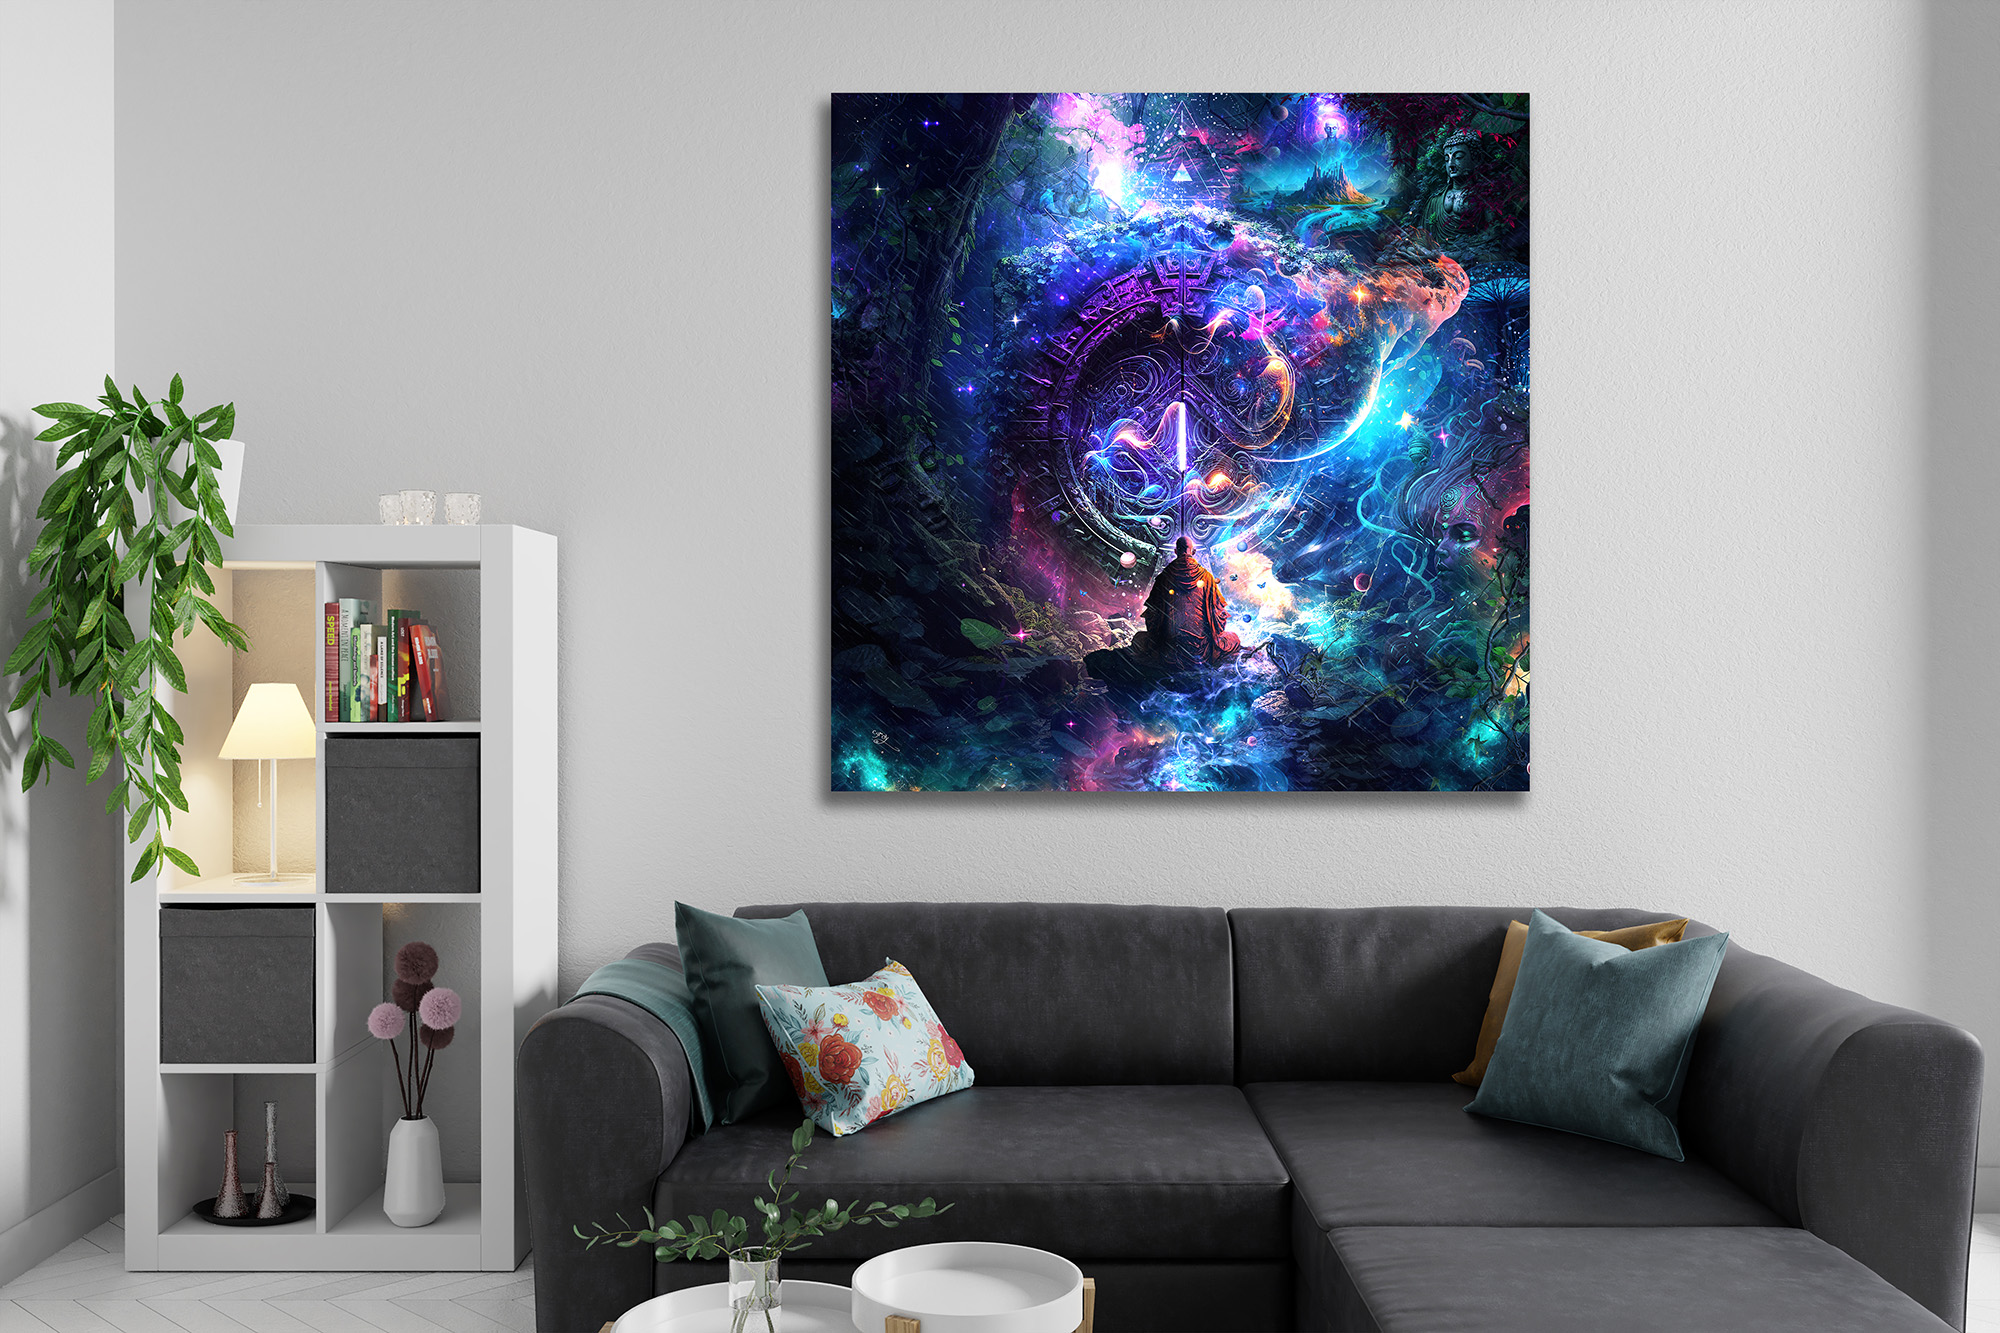 Wall decor canvas art print of meditating buddhist monk in a magical fantasy dream world by Cameron Gray